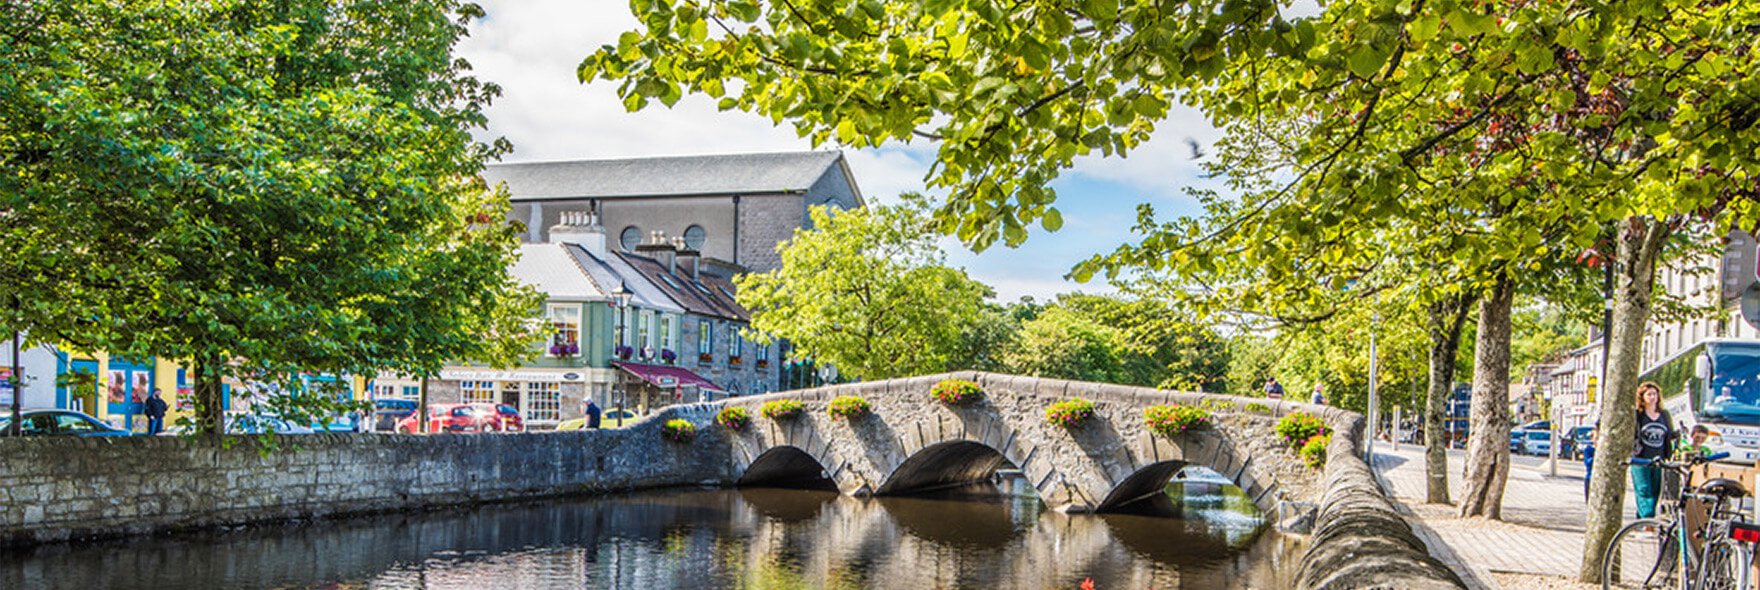 Westport Town on a sunny day with trees and a river in view 